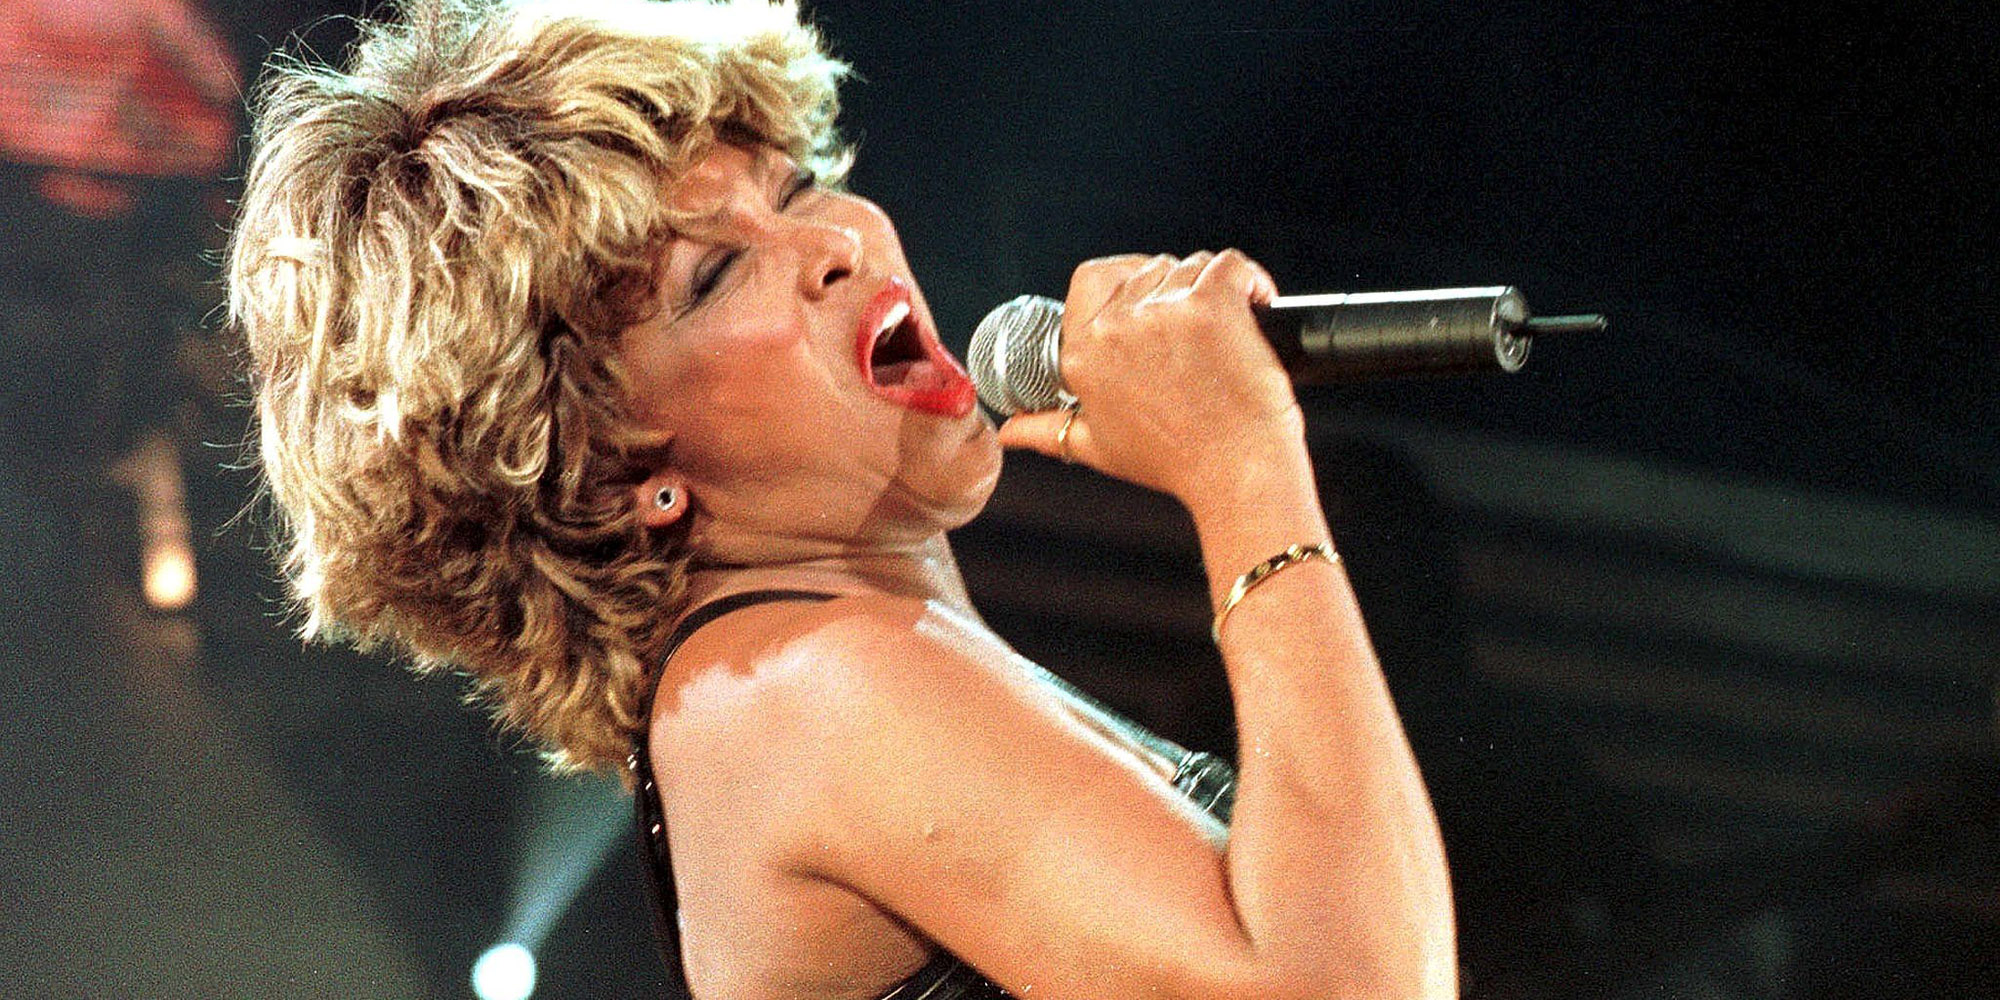 US rock-legend Tina Turner performs on stage of the Hippodrome in Sopot, in the last concert of her European tour in Sopot, Poland, 15 August 2000. (Photo: EPA-EFE / Maciej Kosycarz)